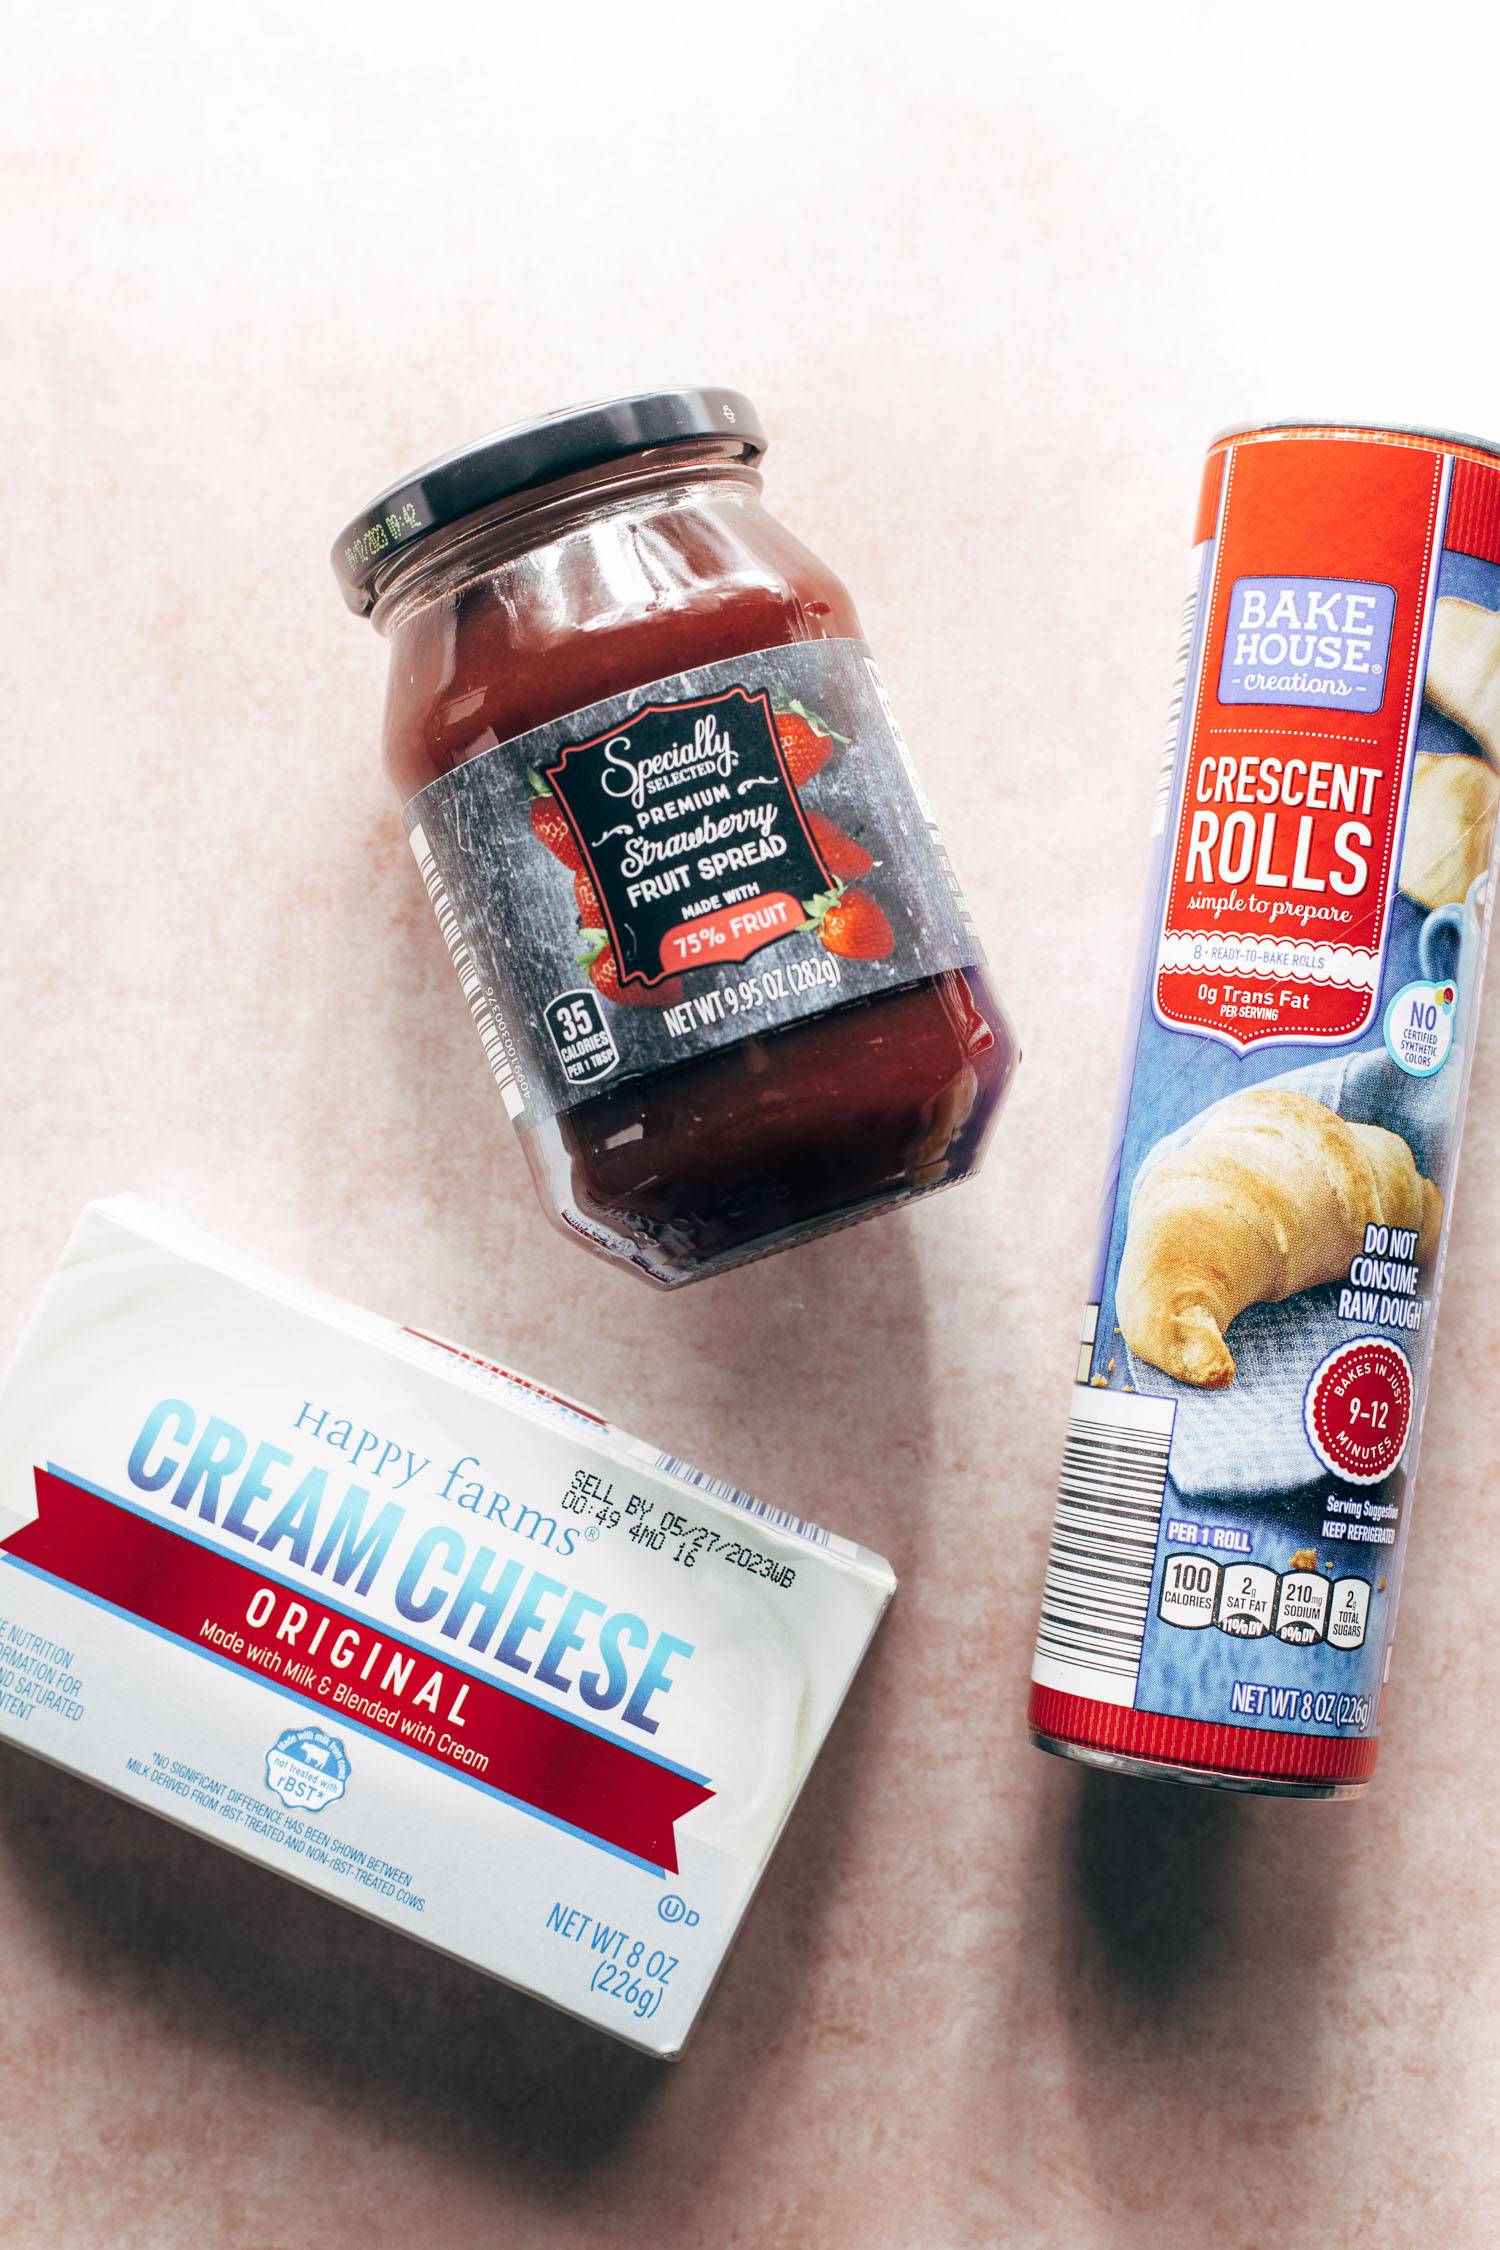 Cream cheese, jam, and crescent roll ingredients